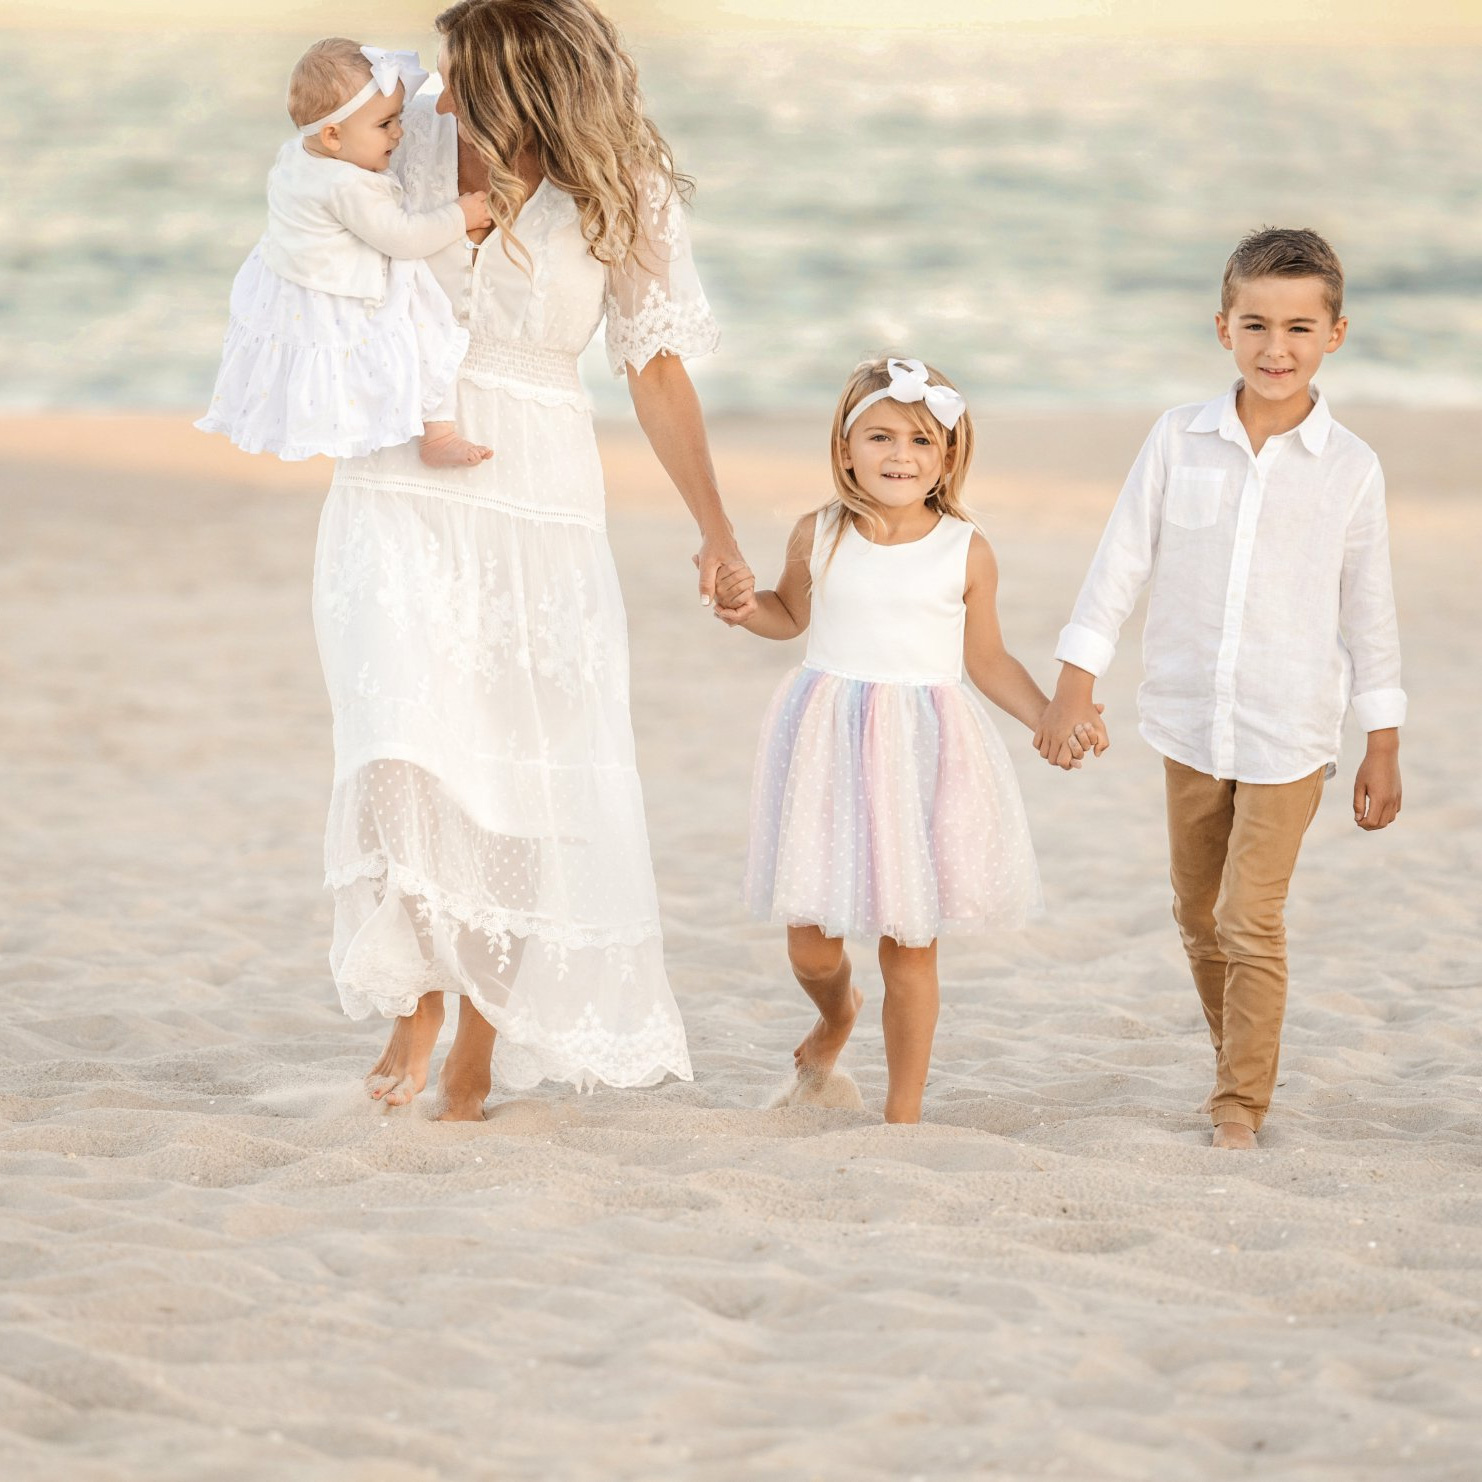 Dr. Kimberly on the beach with her three young children all wearing white.